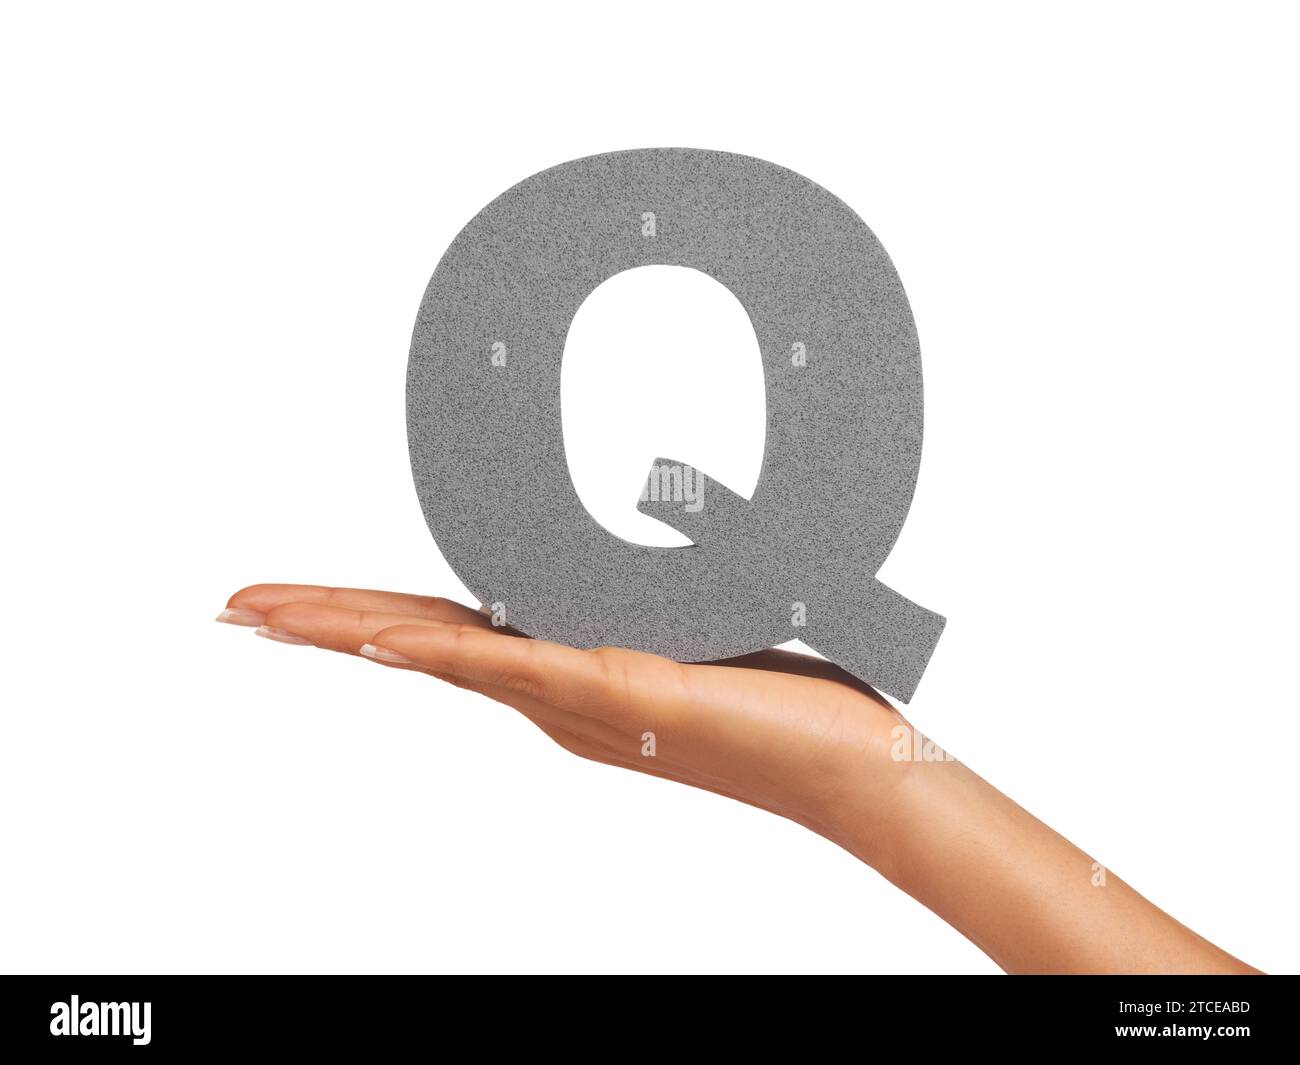 Woman, hand and letter Q or font in studio for advertising, learning or teaching presentation. Sign, alphabet or character for marketing, text or Stock Photo